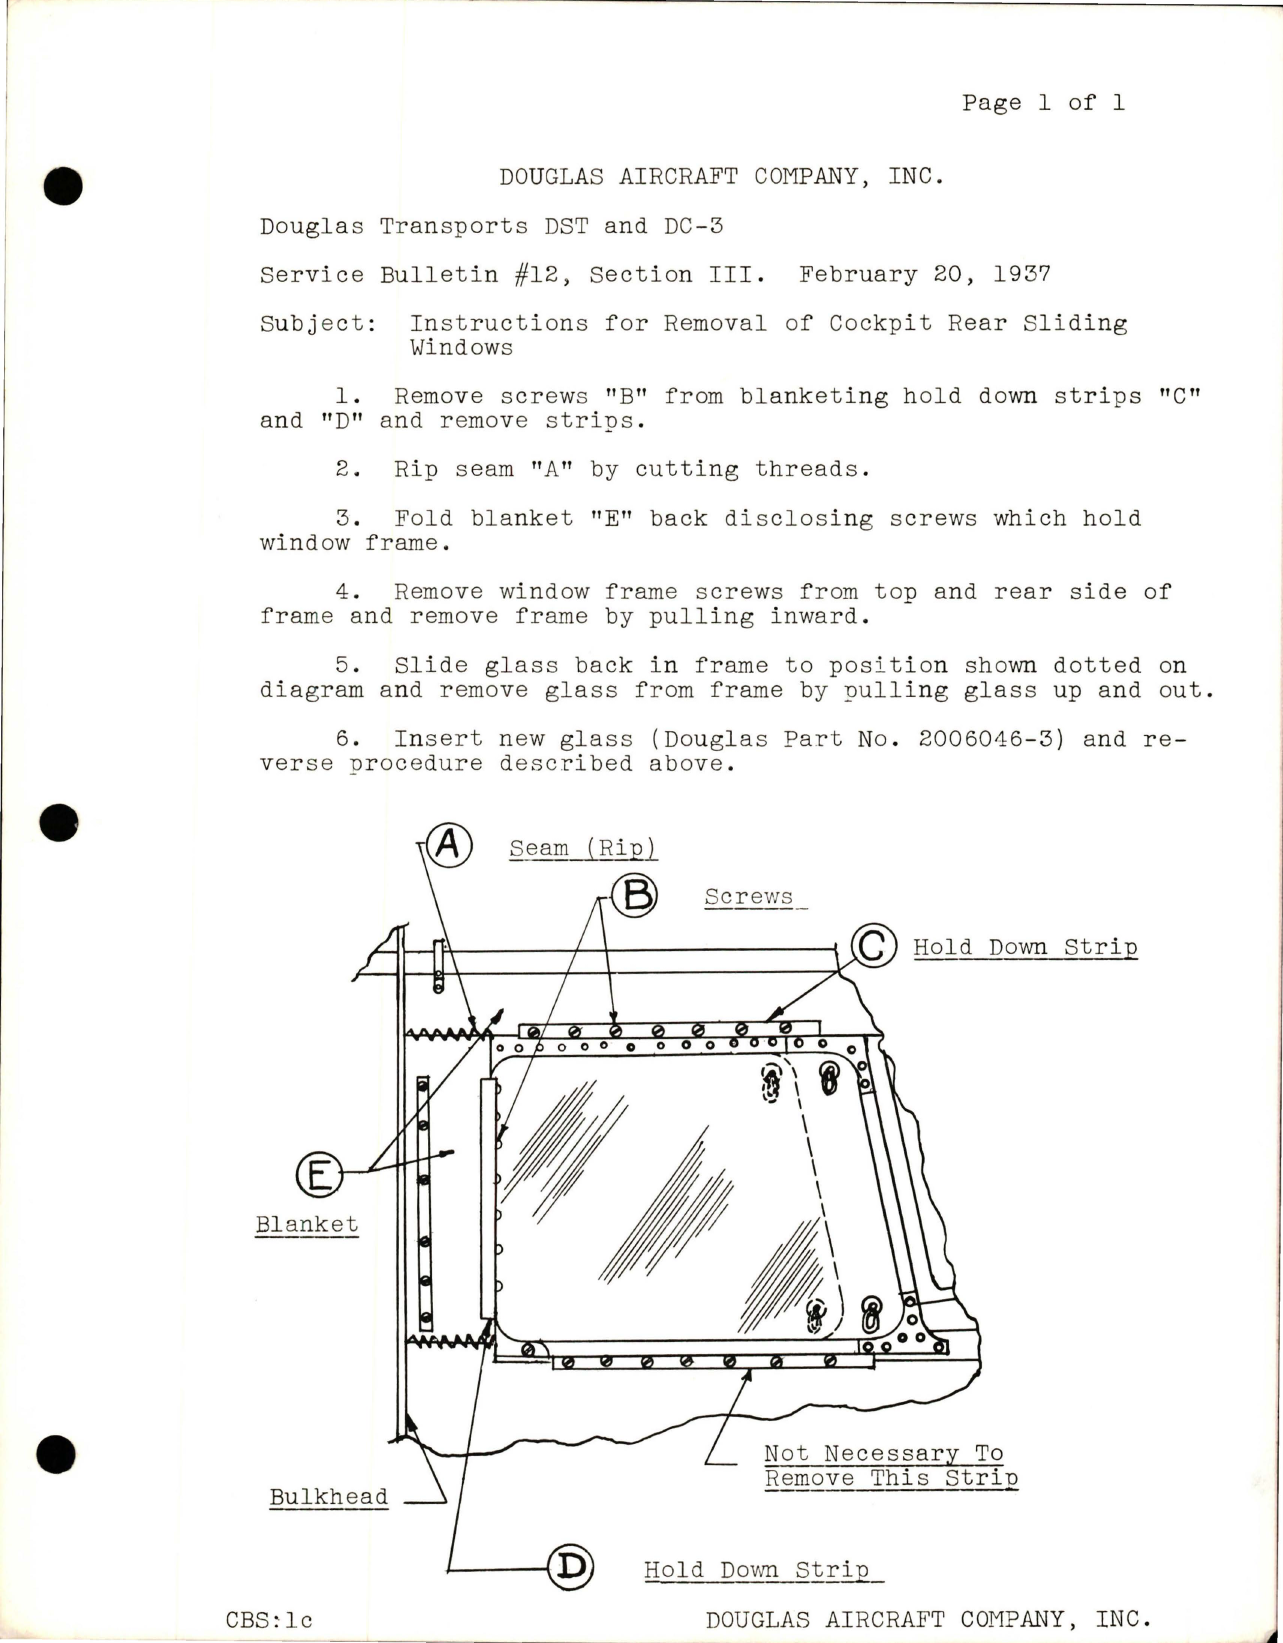 Sample page 1 from AirCorps Library document: Instructions for Removal of Cockpit Rear Sliding Windows